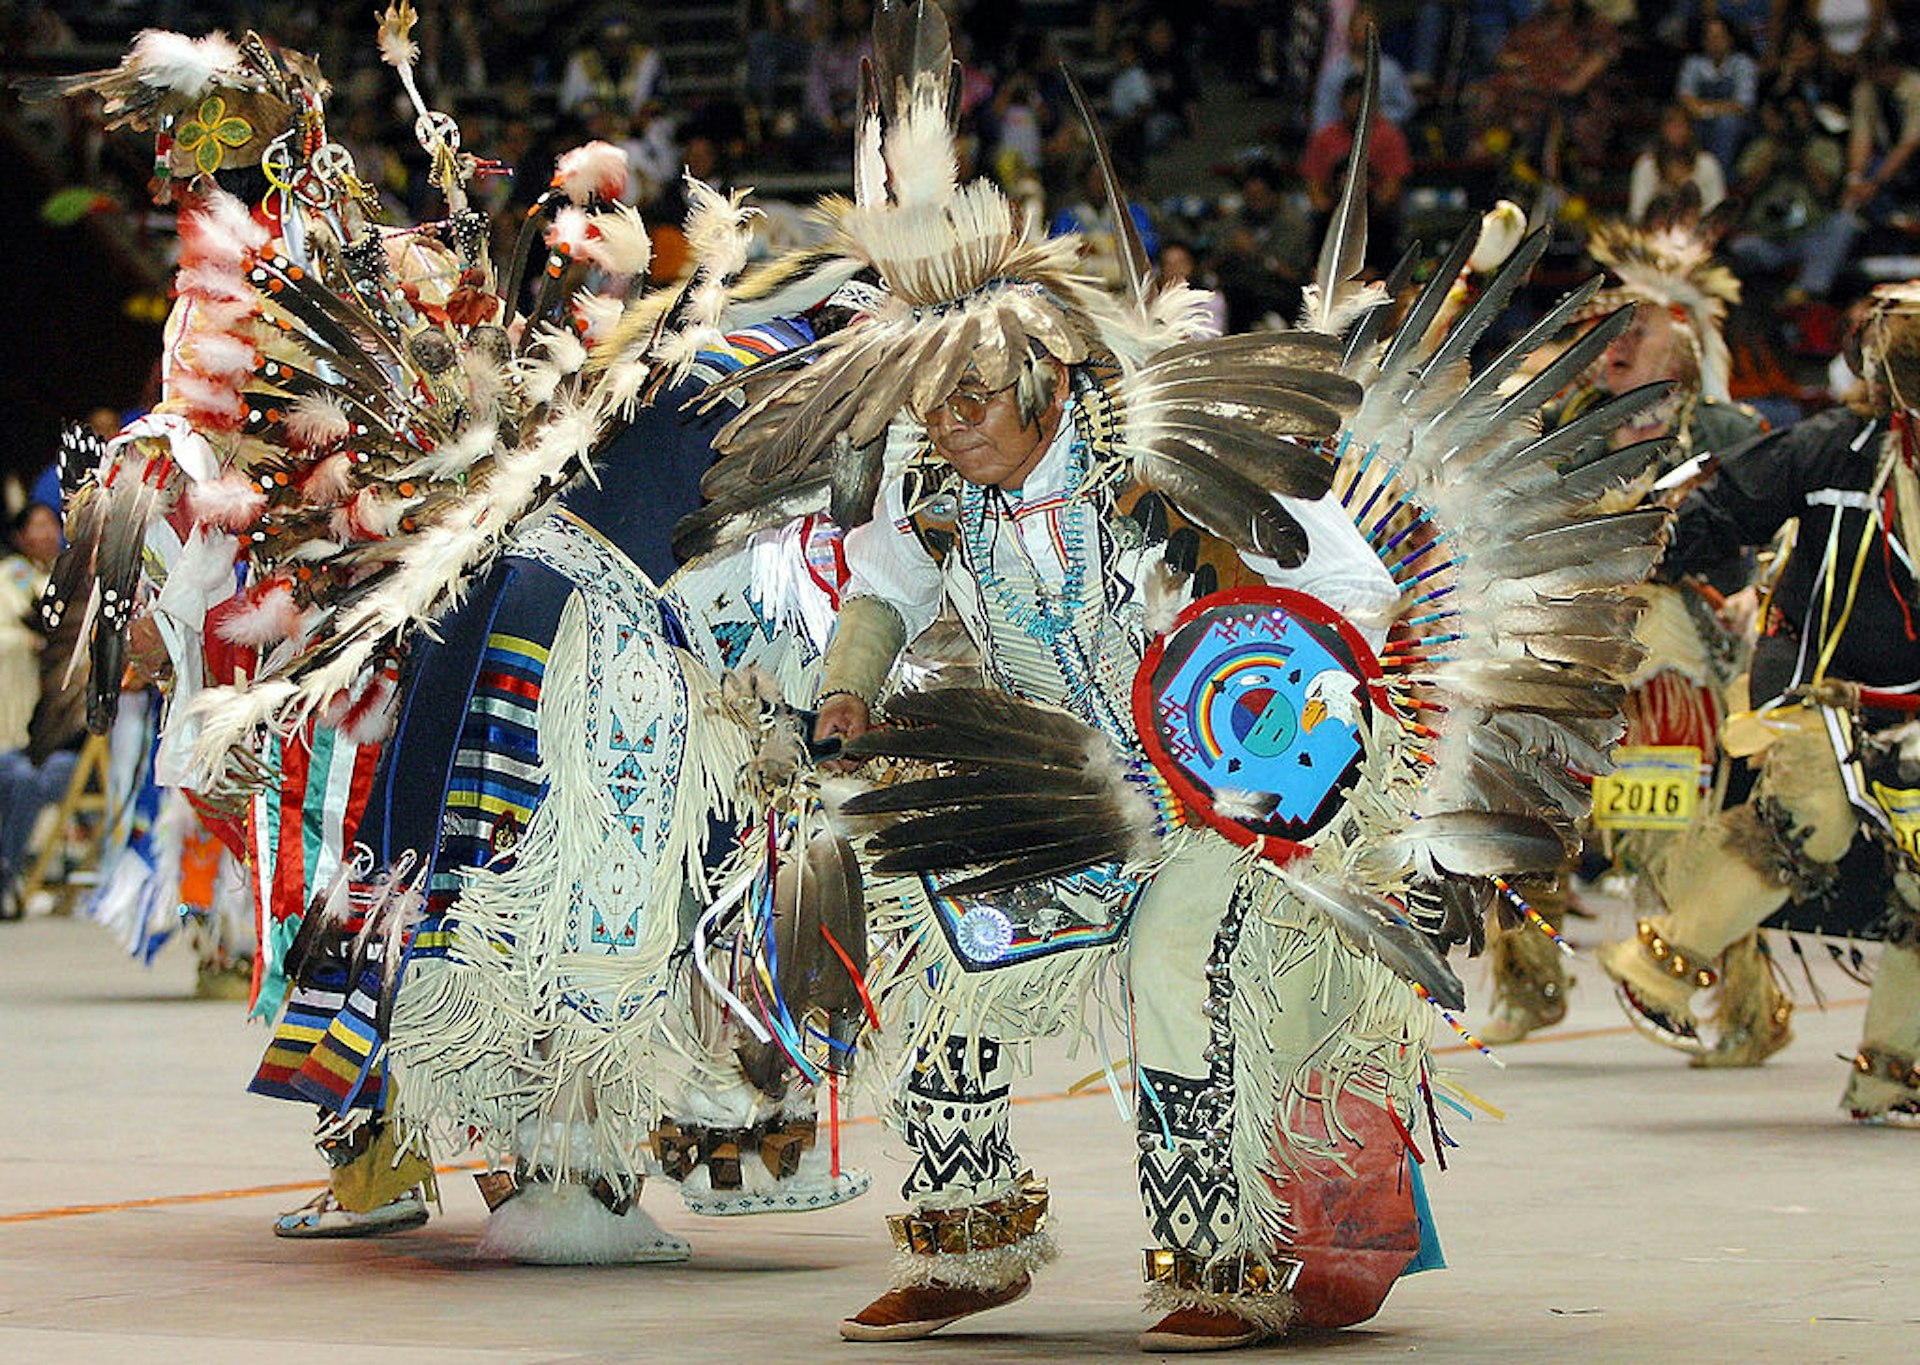 Native American dancers dressed in traditional feathered costumes